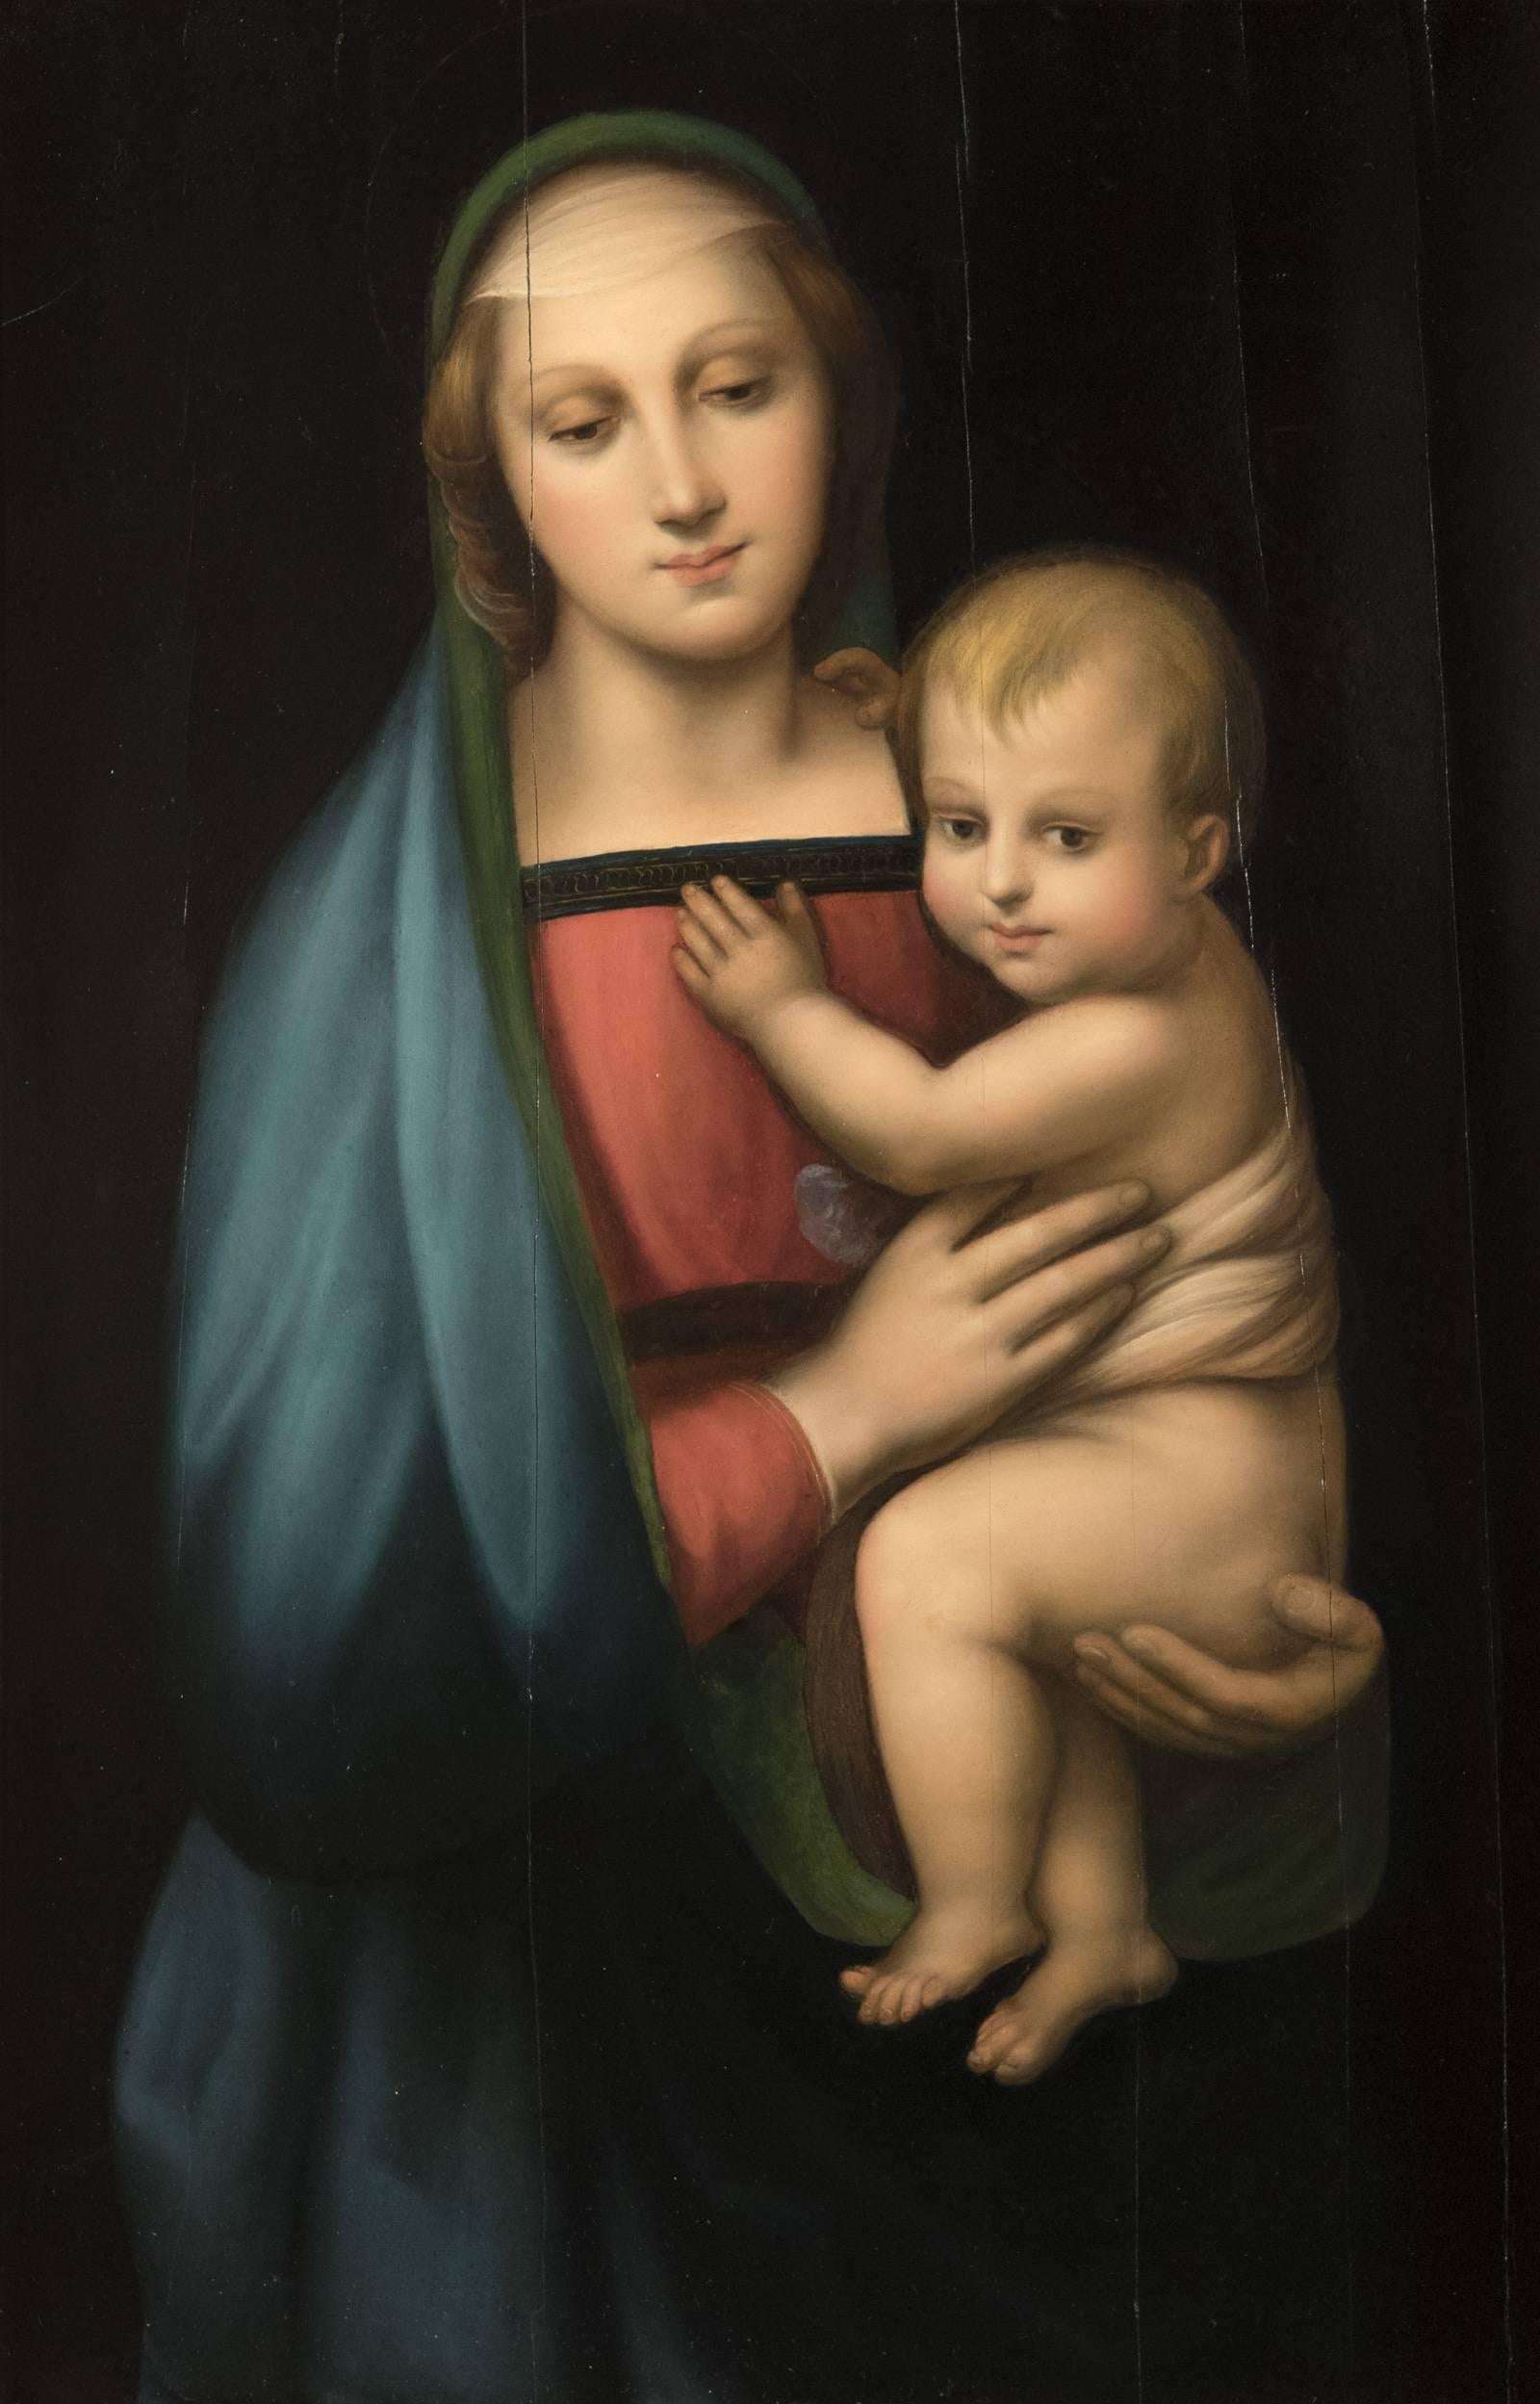 An unsigned 19th century copy of Raphael's Madonna del Granduca, painted on a wood panel that is cradled in the original carved giltwood frame with acanthus leaf motif. The original painting by Raphael (1483-1520) dates from c.1505 and is in the